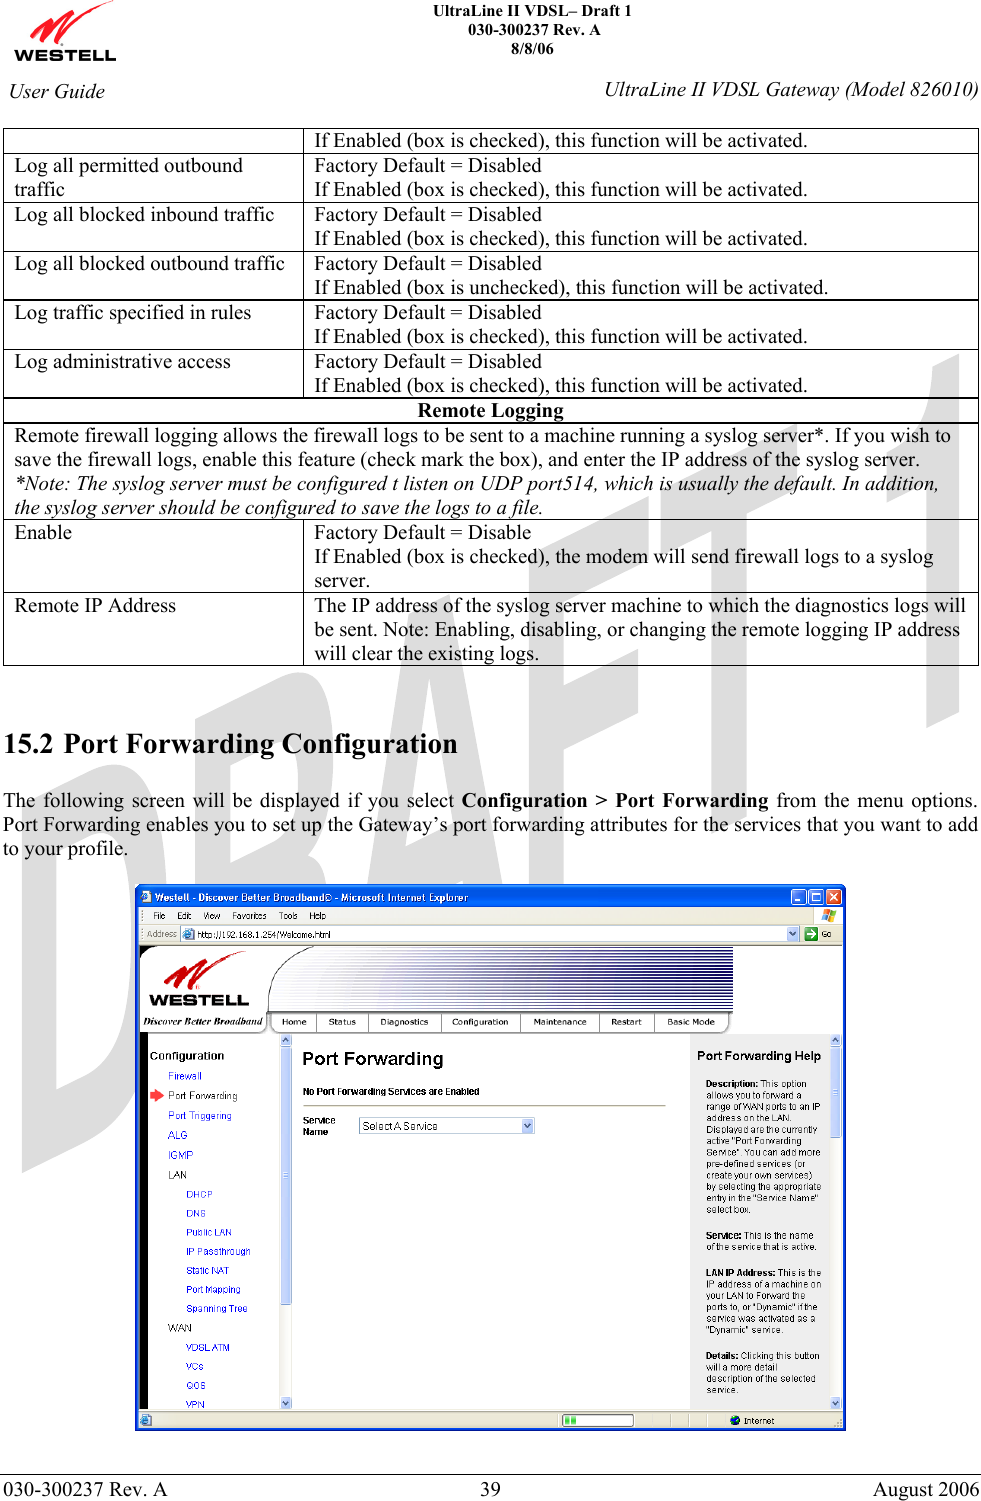    UltraLine II VDSL– Draft 1  030-300237 Rev. A 8/8/06   030-300237 Rev. A  39  August 2006  User Guide  UltraLine II VDSL Gateway (Model 826010) If Enabled (box is checked), this function will be activated. Log all permitted outbound traffic Factory Default = Disabled If Enabled (box is checked), this function will be activated. Log all blocked inbound traffic  Factory Default = Disabled If Enabled (box is checked), this function will be activated. Log all blocked outbound traffic  Factory Default = Disabled If Enabled (box is unchecked), this function will be activated. Log traffic specified in rules  Factory Default = Disabled If Enabled (box is checked), this function will be activated. Log administrative access  Factory Default = Disabled If Enabled (box is checked), this function will be activated. Remote Logging Remote firewall logging allows the firewall logs to be sent to a machine running a syslog server*. If you wish to save the firewall logs, enable this feature (check mark the box), and enter the IP address of the syslog server. *Note: The syslog server must be configured t listen on UDP port514, which is usually the default. In addition, the syslog server should be configured to save the logs to a file. Enable  Factory Default = Disable If Enabled (box is checked), the modem will send firewall logs to a syslog server. Remote IP Address  The IP address of the syslog server machine to which the diagnostics logs will be sent. Note: Enabling, disabling, or changing the remote logging IP address will clear the existing logs.   15.2 Port Forwarding Configuration  The following screen will be displayed if you select Configuration &gt; Port Forwarding from the menu options. Port Forwarding enables you to set up the Gateway’s port forwarding attributes for the services that you want to add to your profile.    